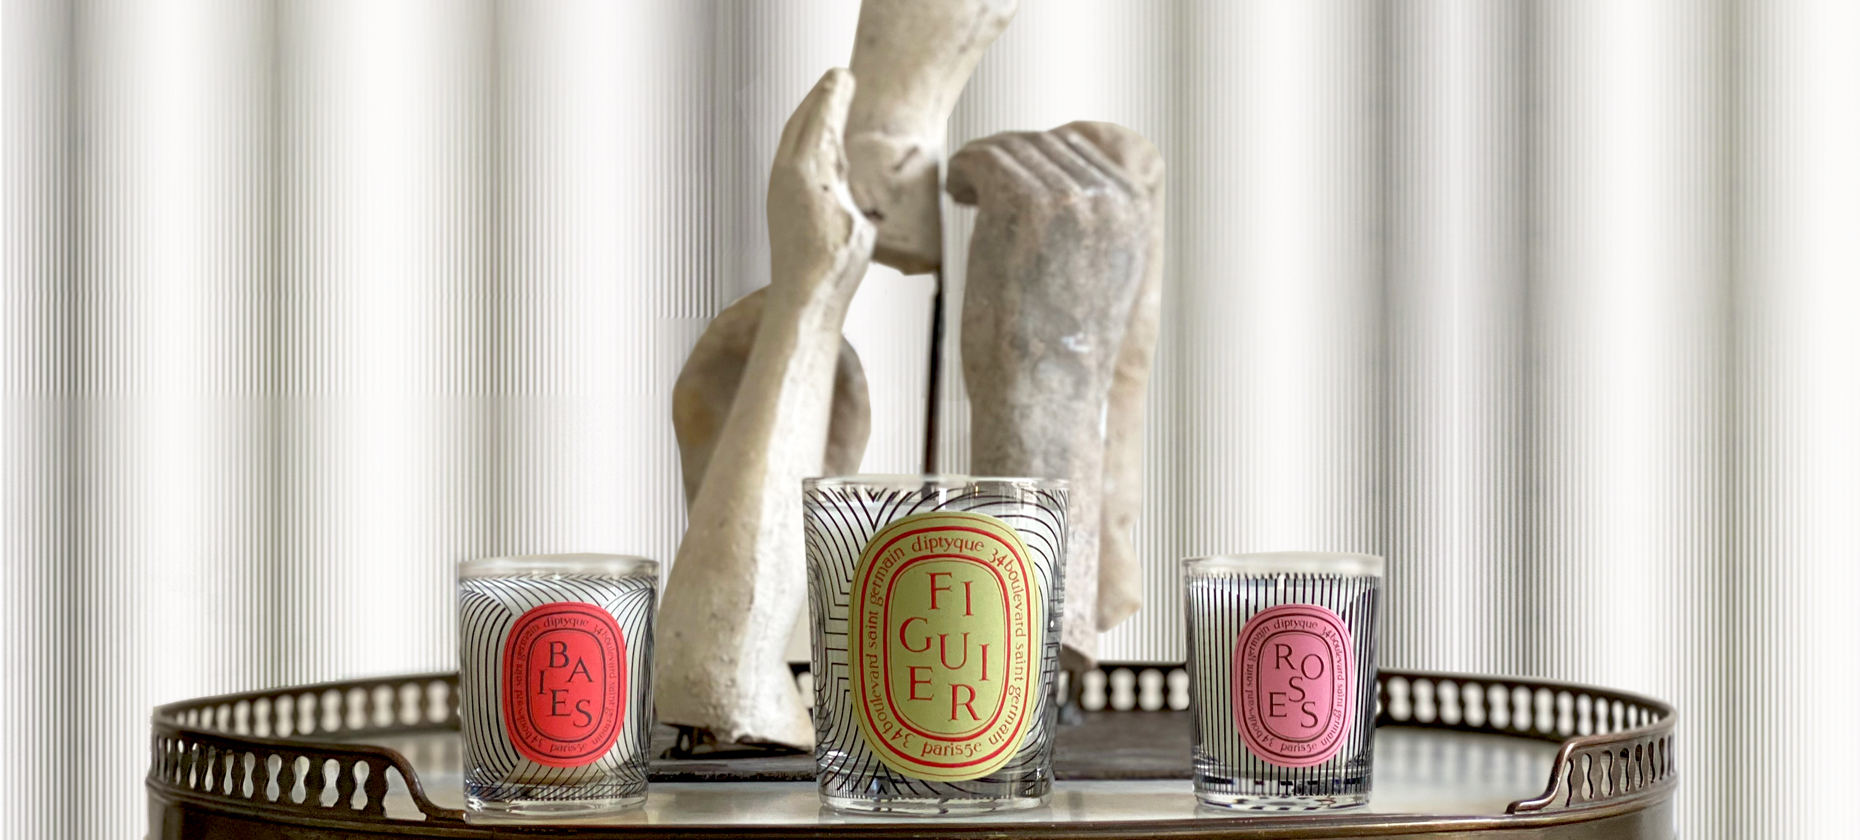 Diptyque candles in a limited edition